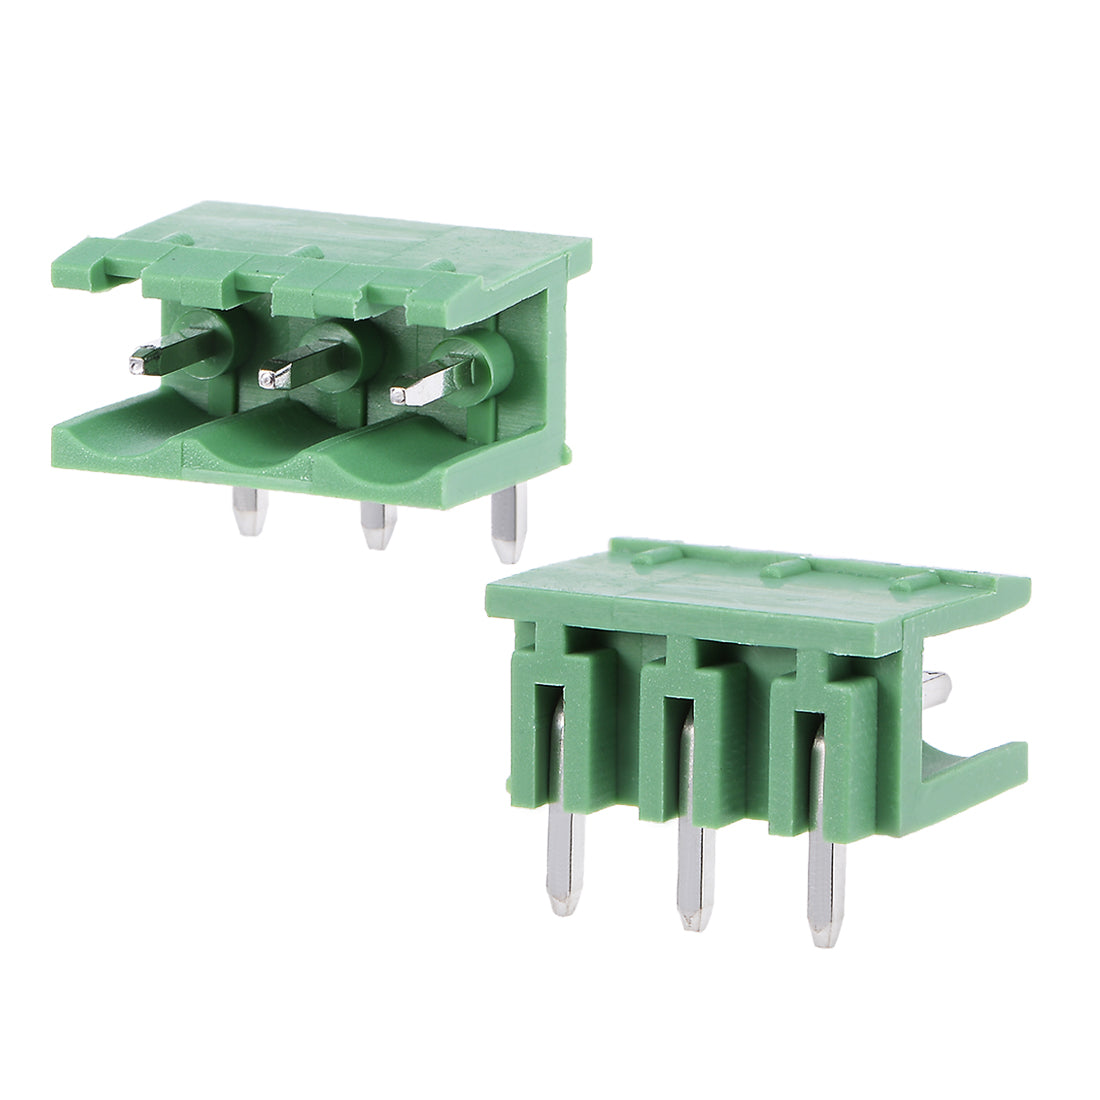 uxcell Uxcell 50Pcs AC 300V 15A 5.08mm Pitch 3P Flat Angle Needle Seat Insert-In PCB Terminal Block Connector